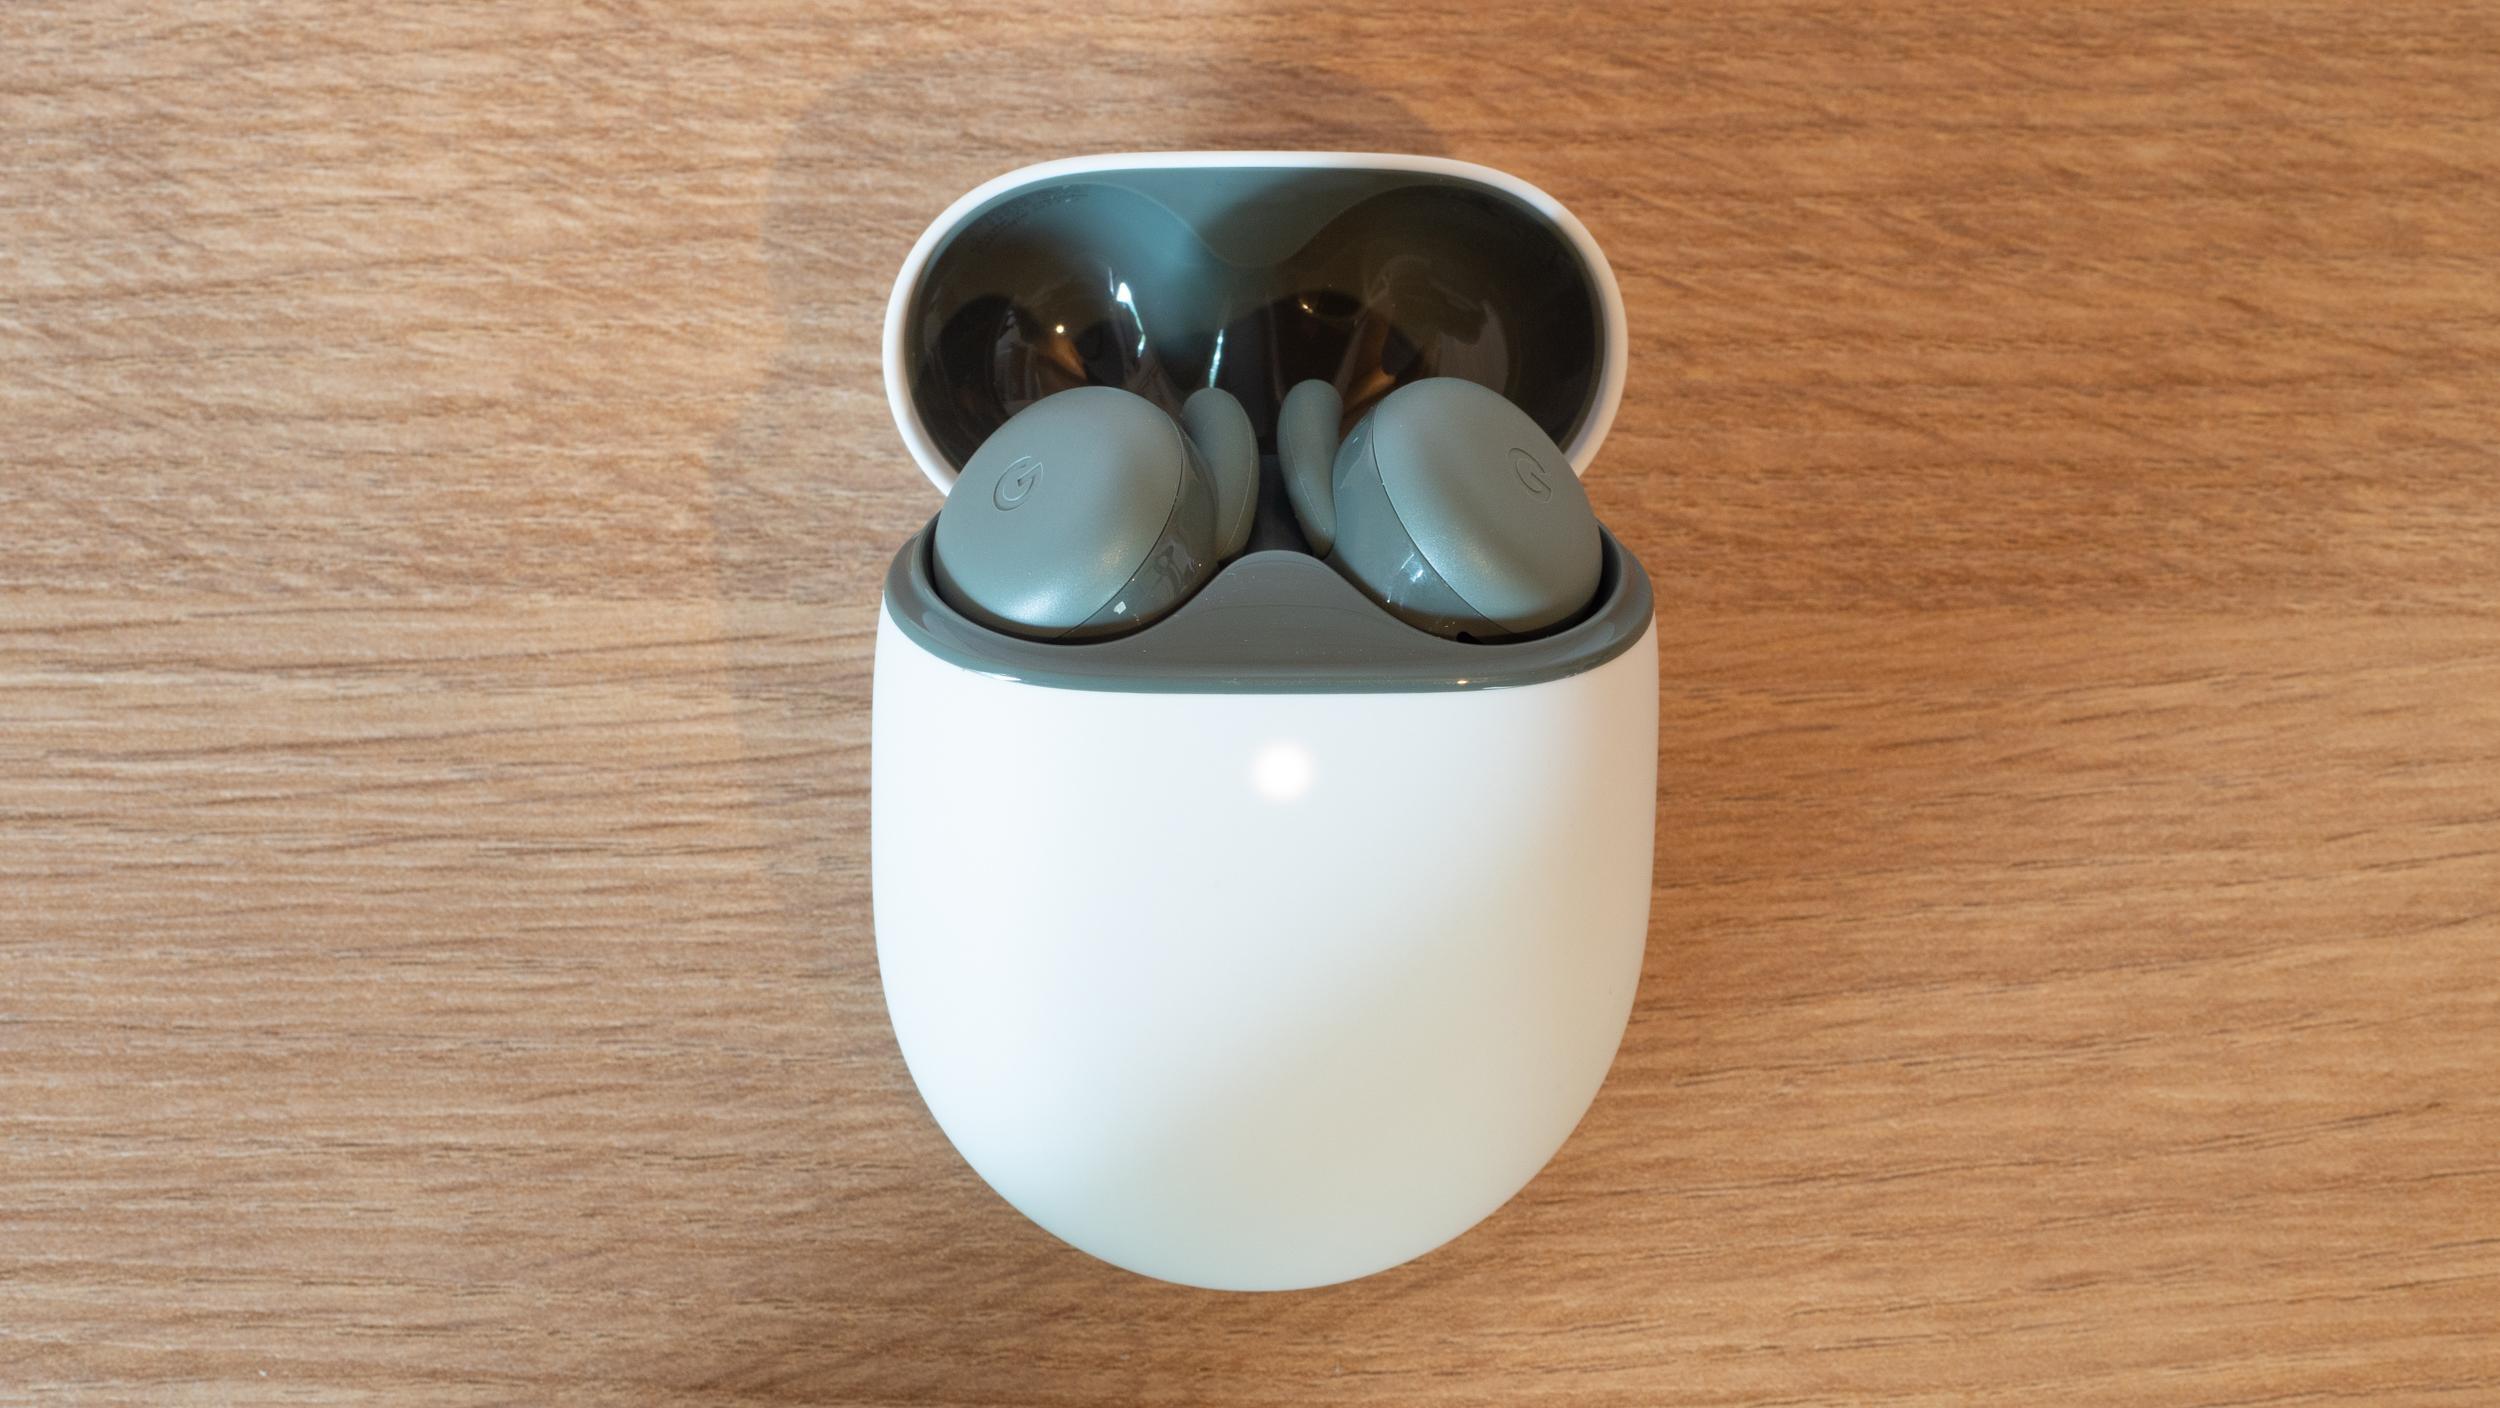 How To Connect Google Earbuds